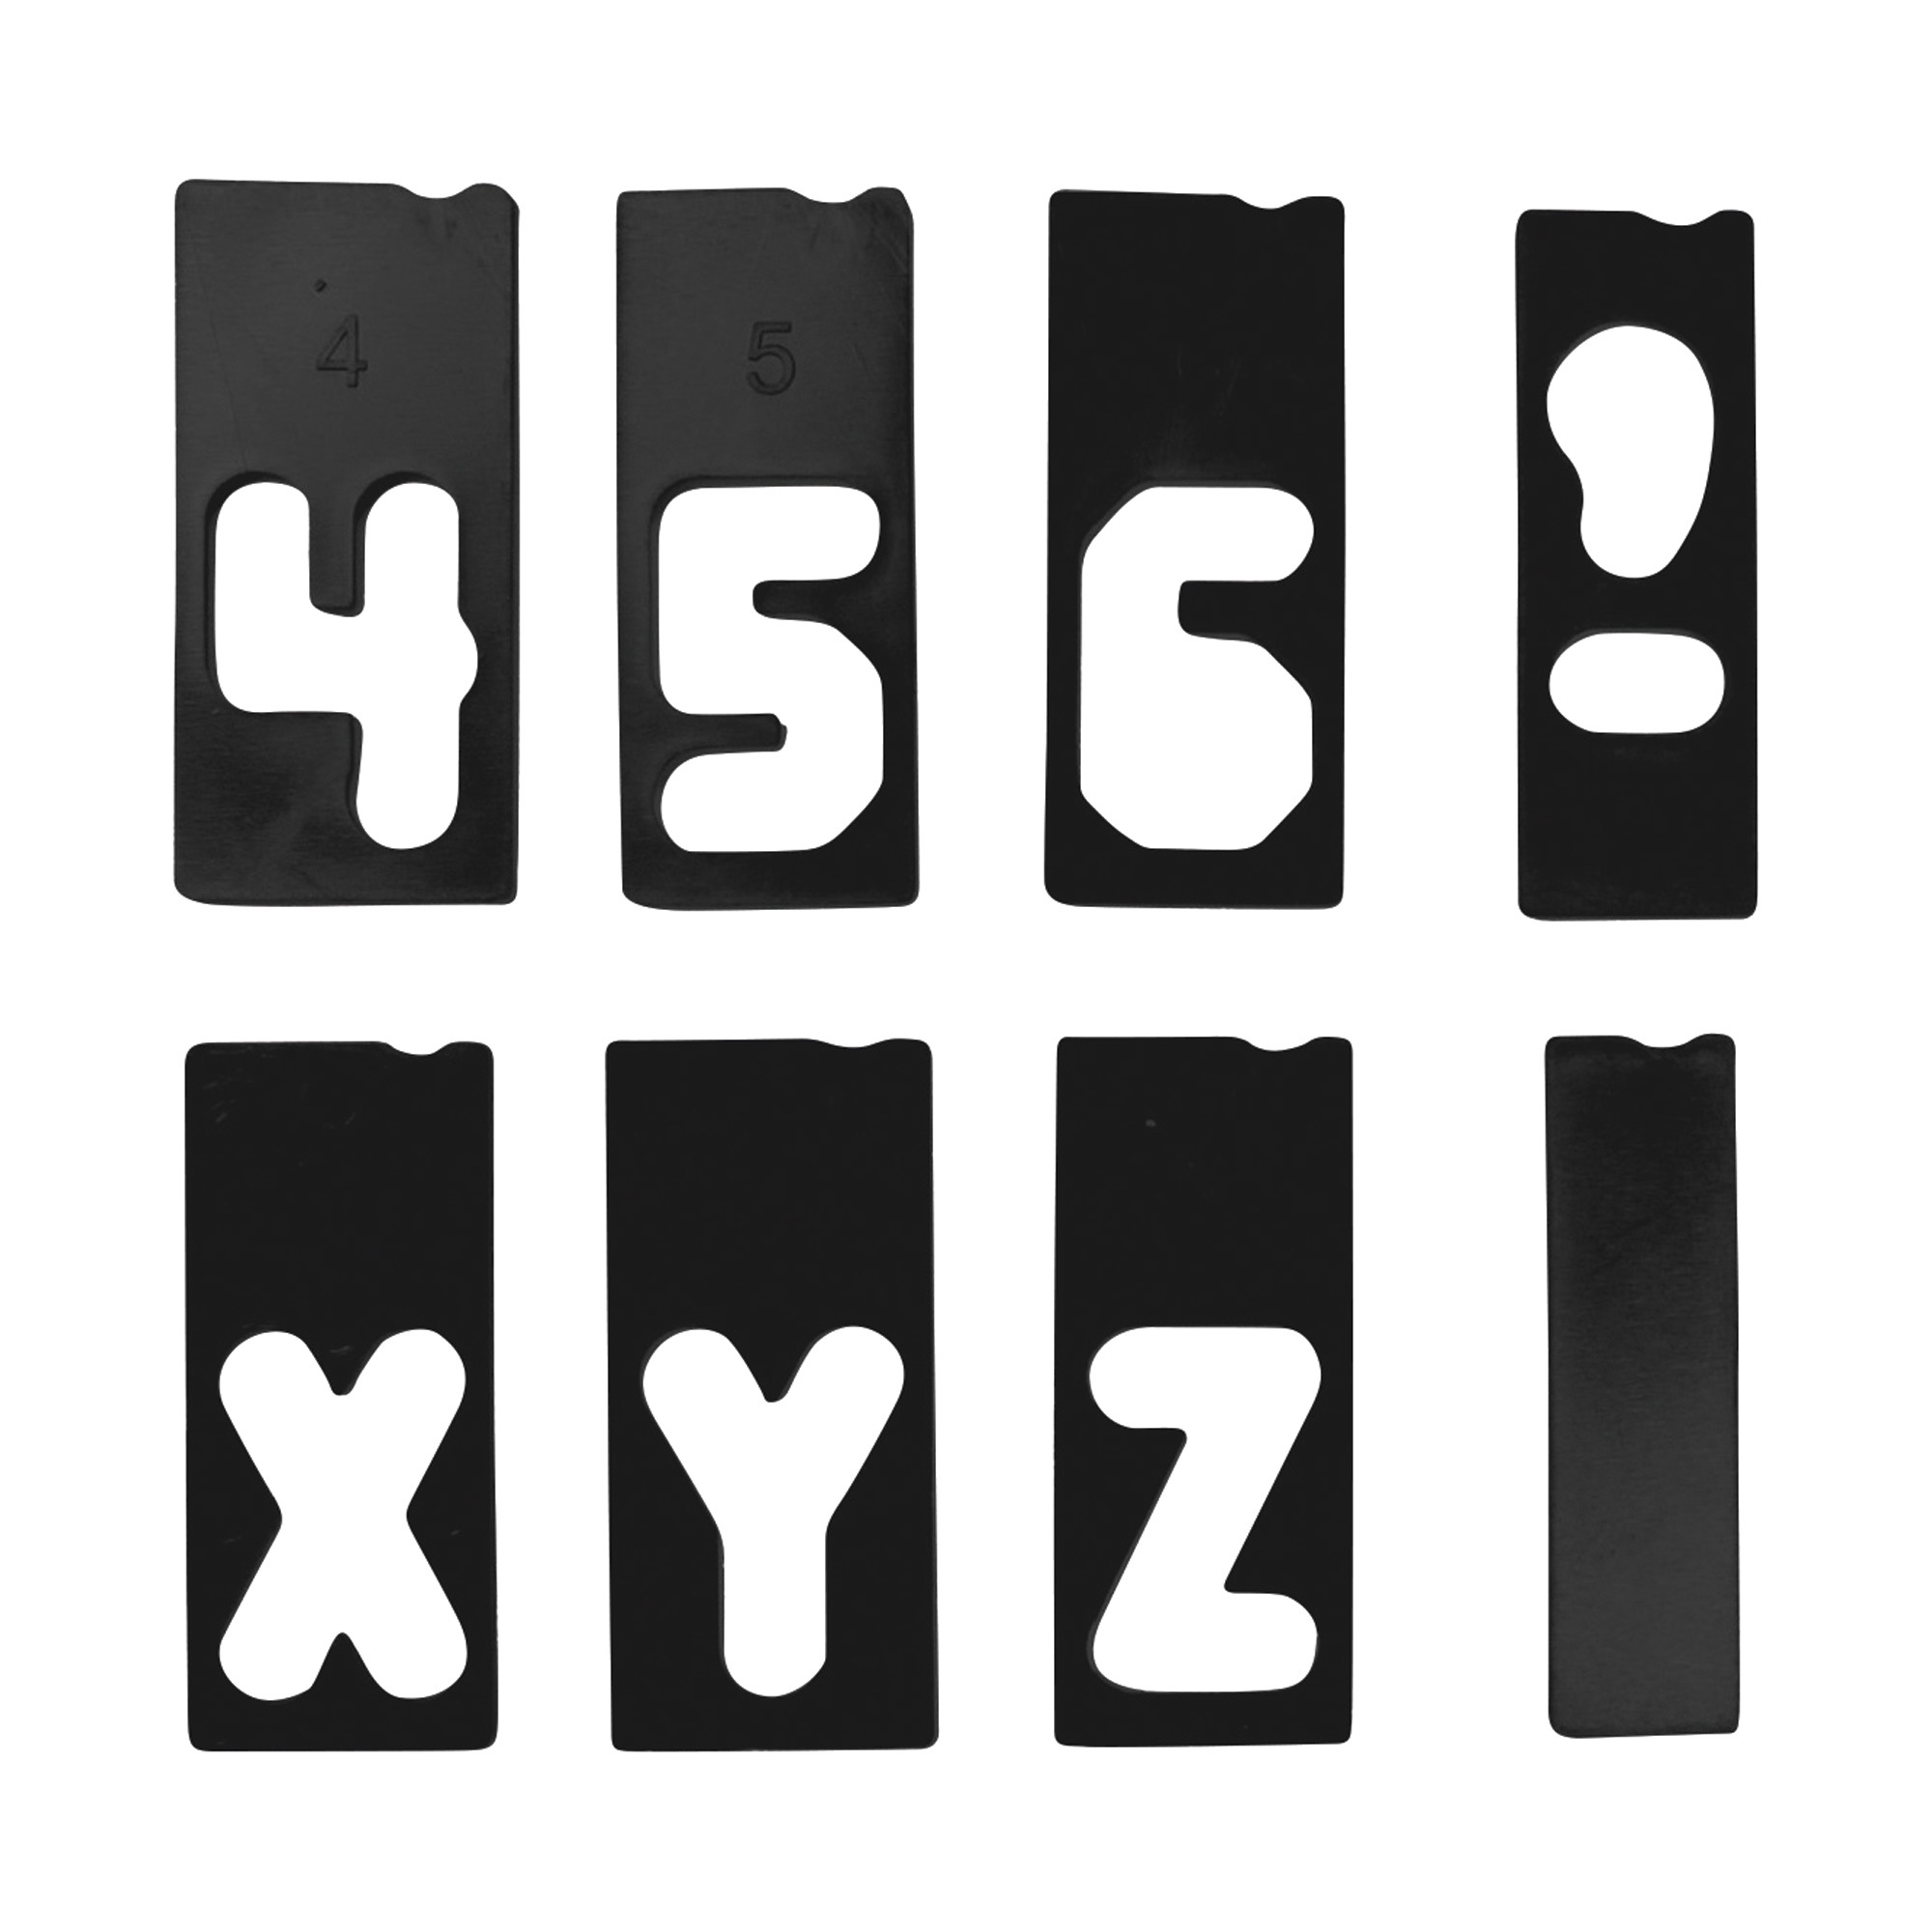 Milescraft 1 1/2Inch Horizontal Letter/Number Set of Router Templates â Model 22020003